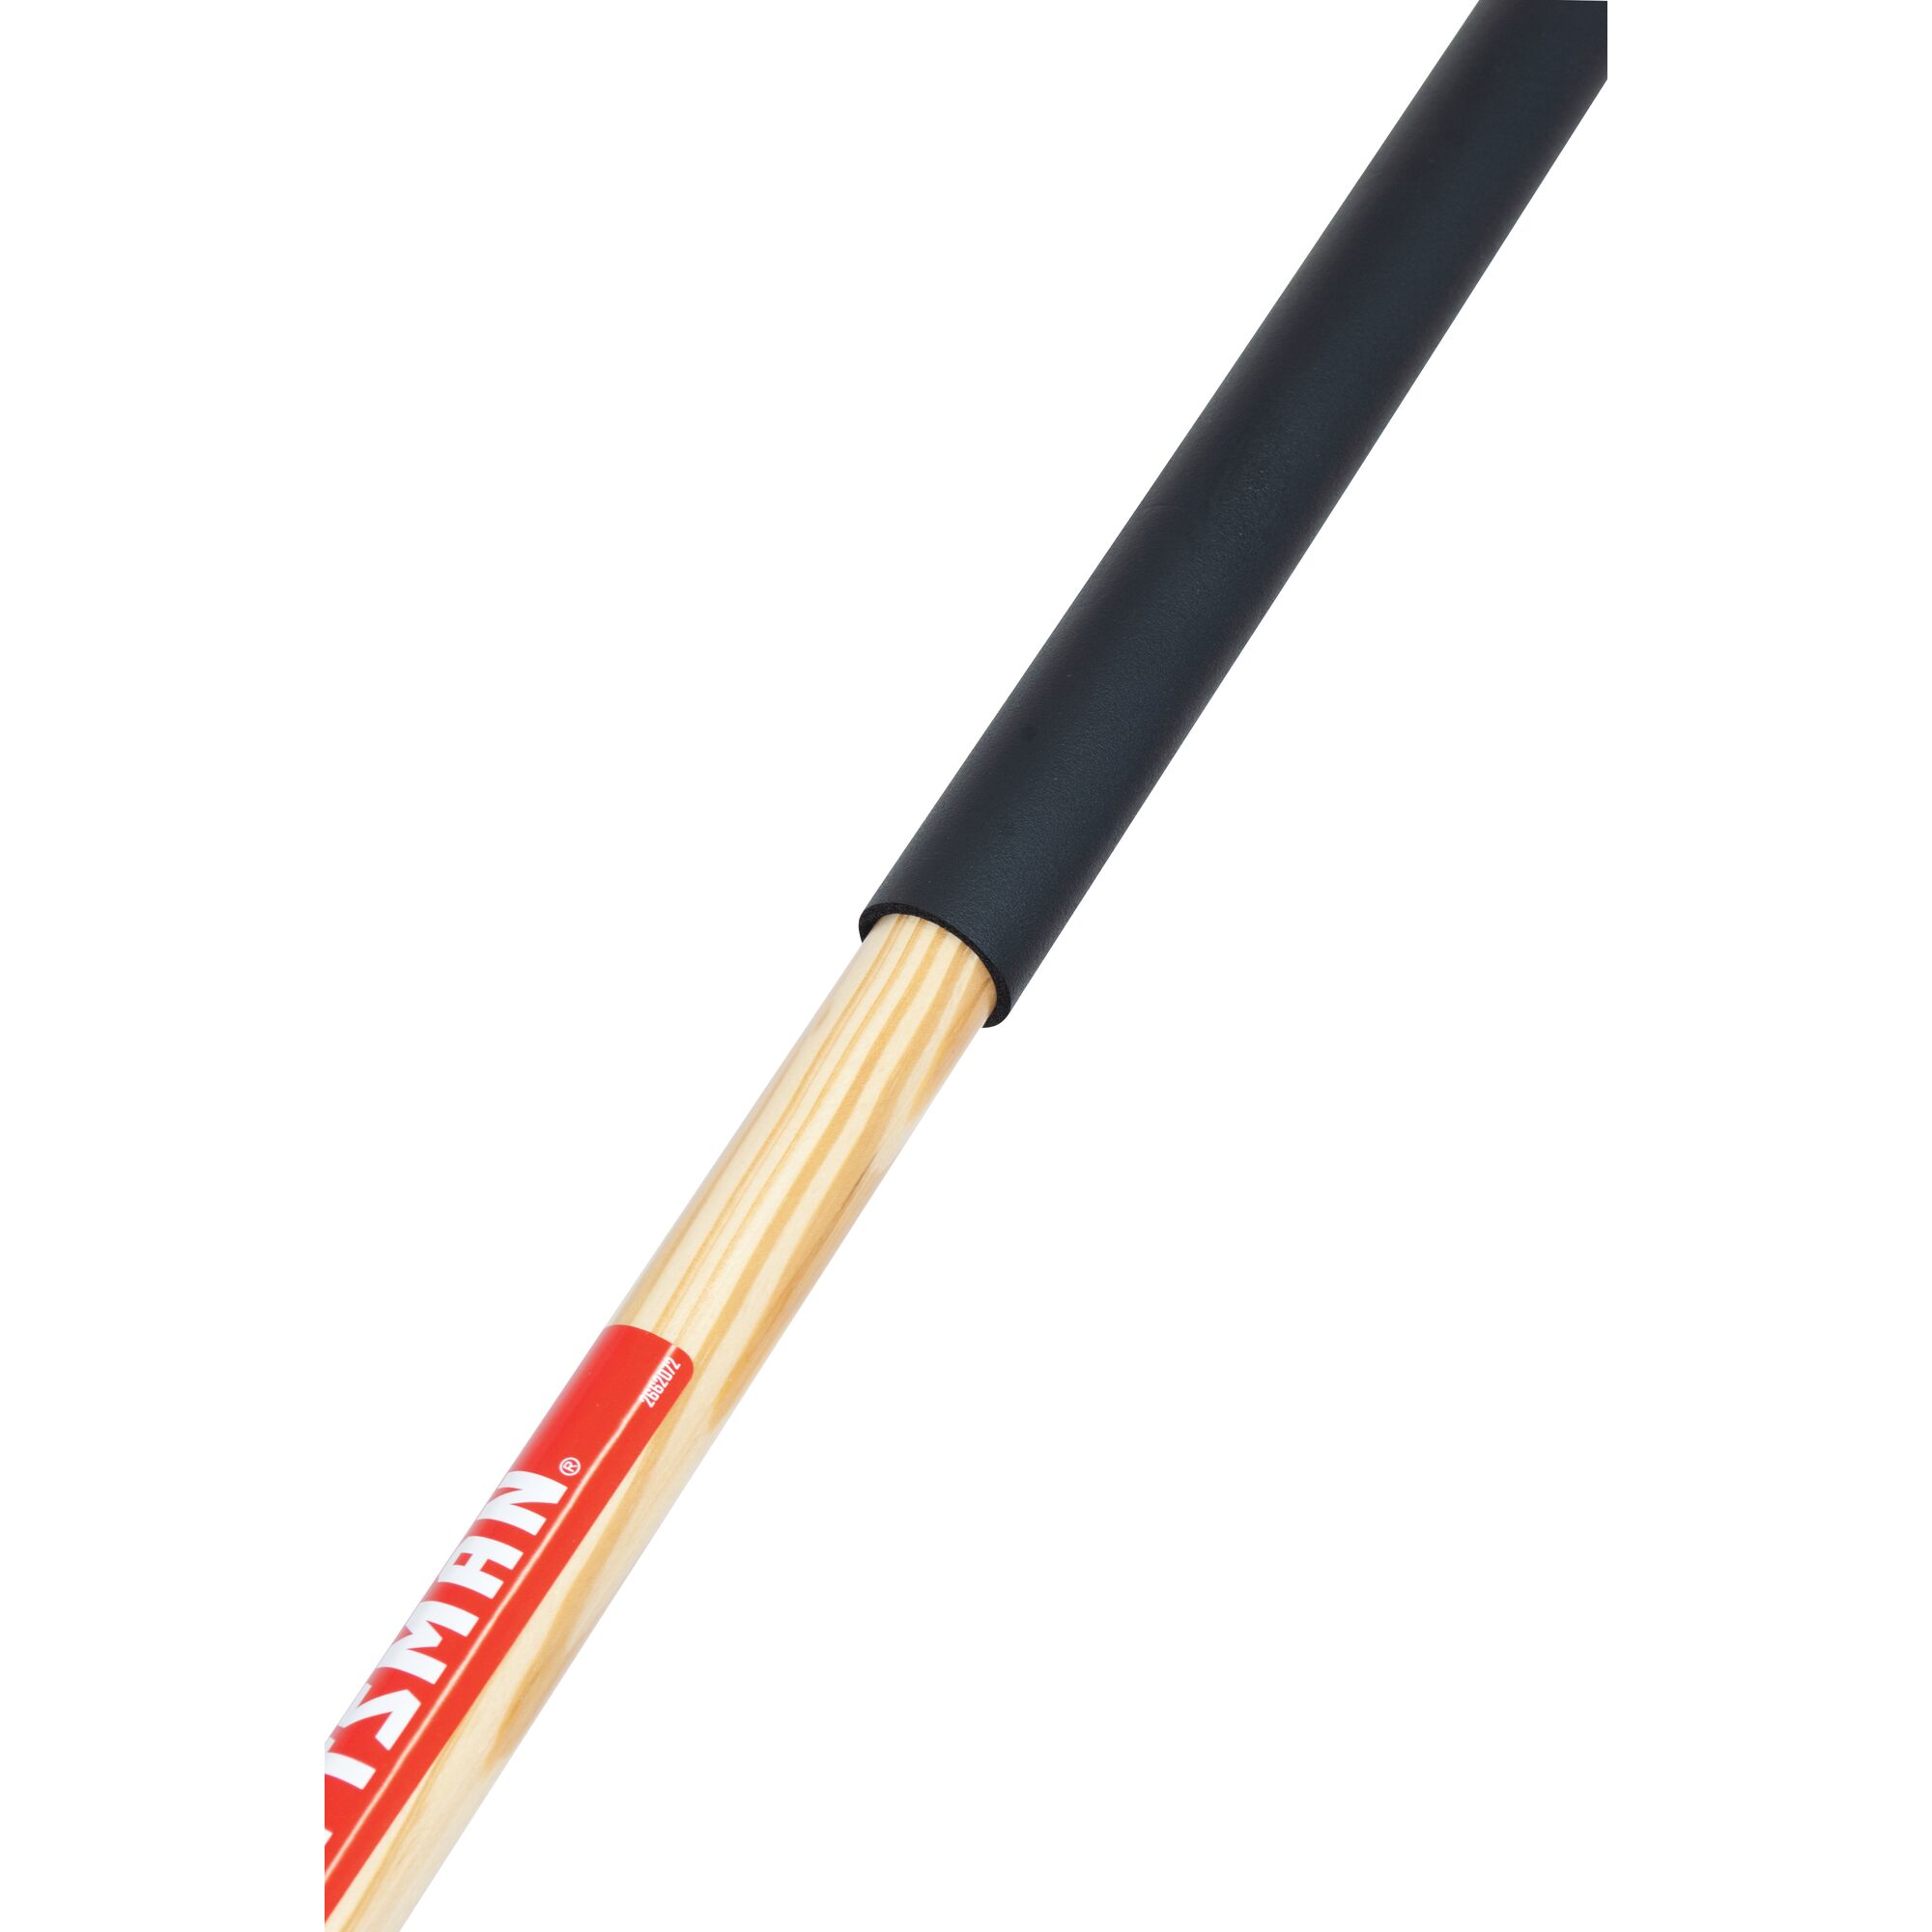 Cushioned end grip feature in wood handle 30 inch leaf rake.